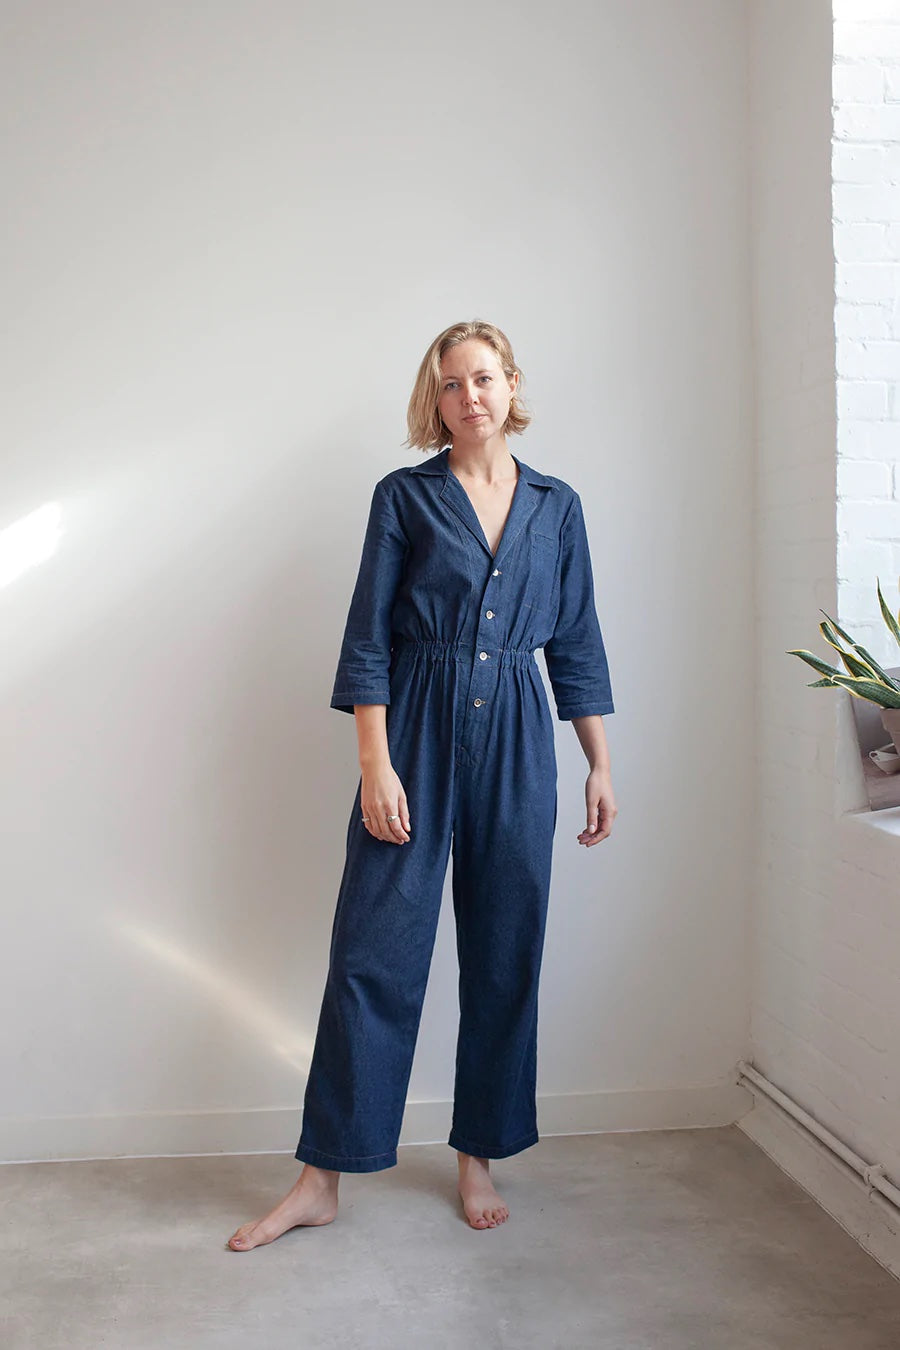 Woman wearing the Jesse Jumpsuit sewing pattern from The Modern Sewing Co on The Fold Line. A Jumpsuit pattern made in light/medium weight denim or twill, light weight canvas; needlecord, wool suiting or linen fabrics, featuring a relaxed fit, collar, dee